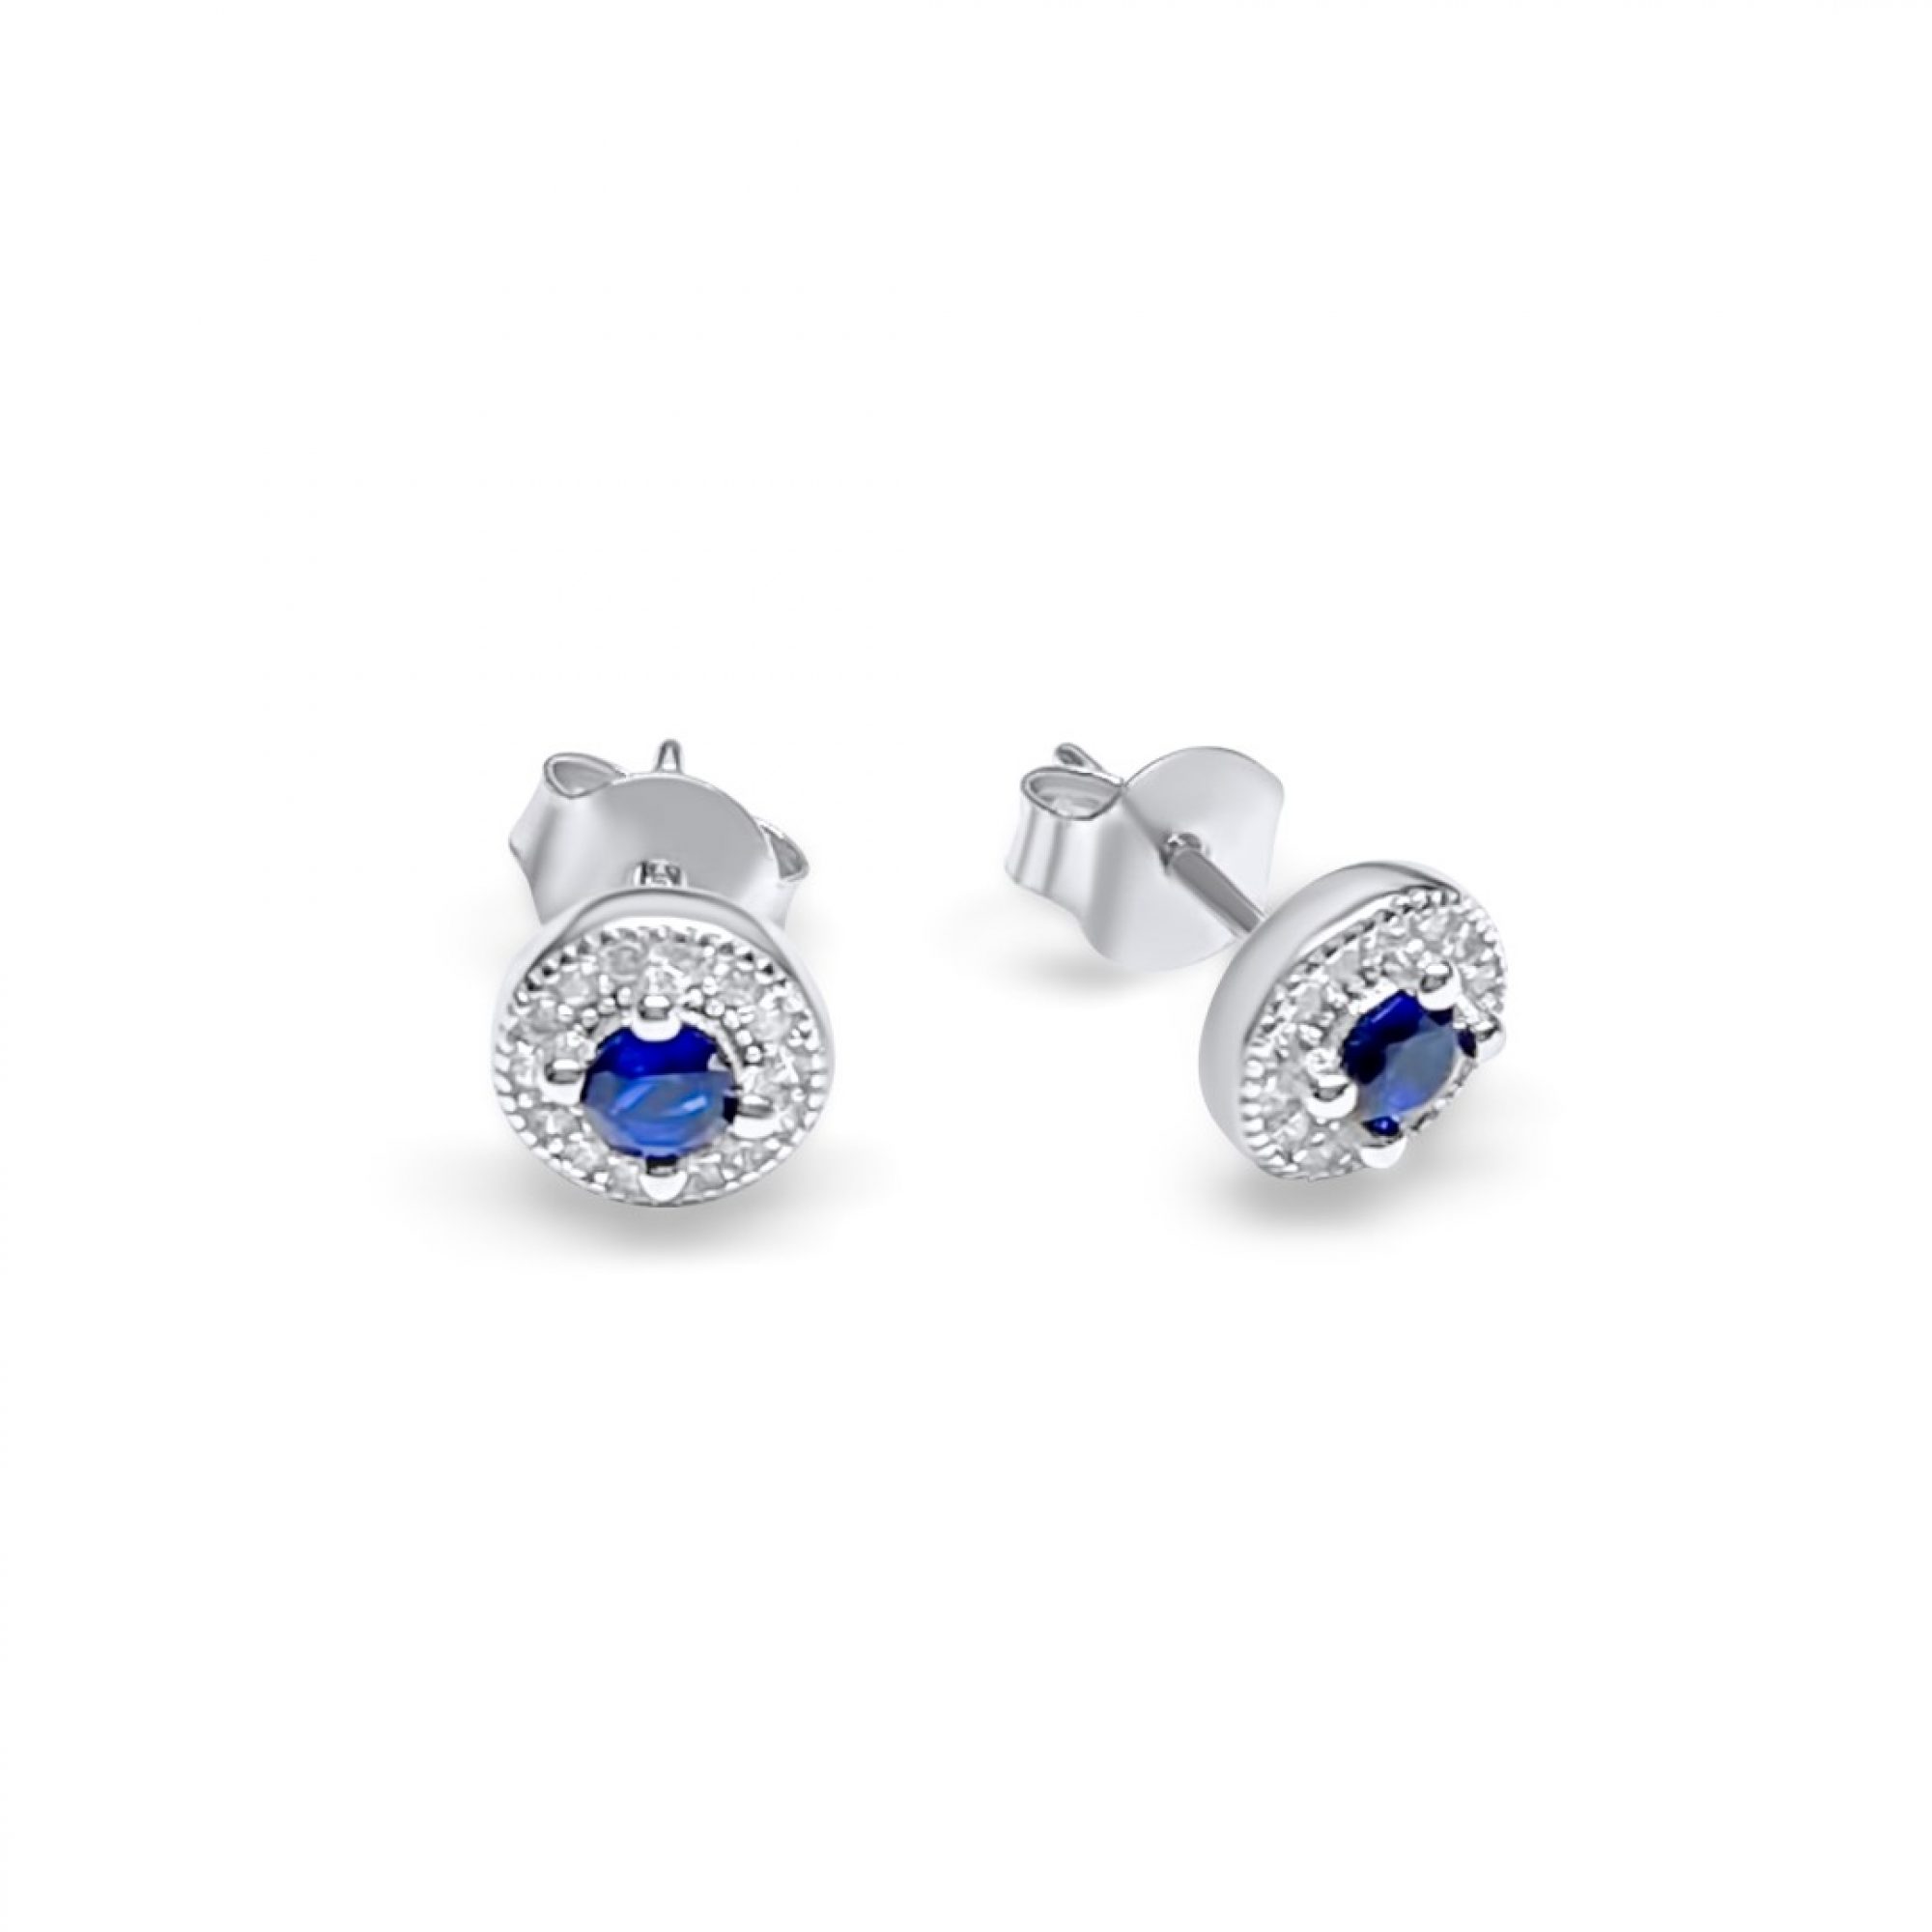 Silver stud earrings with sapphire and zircon stones